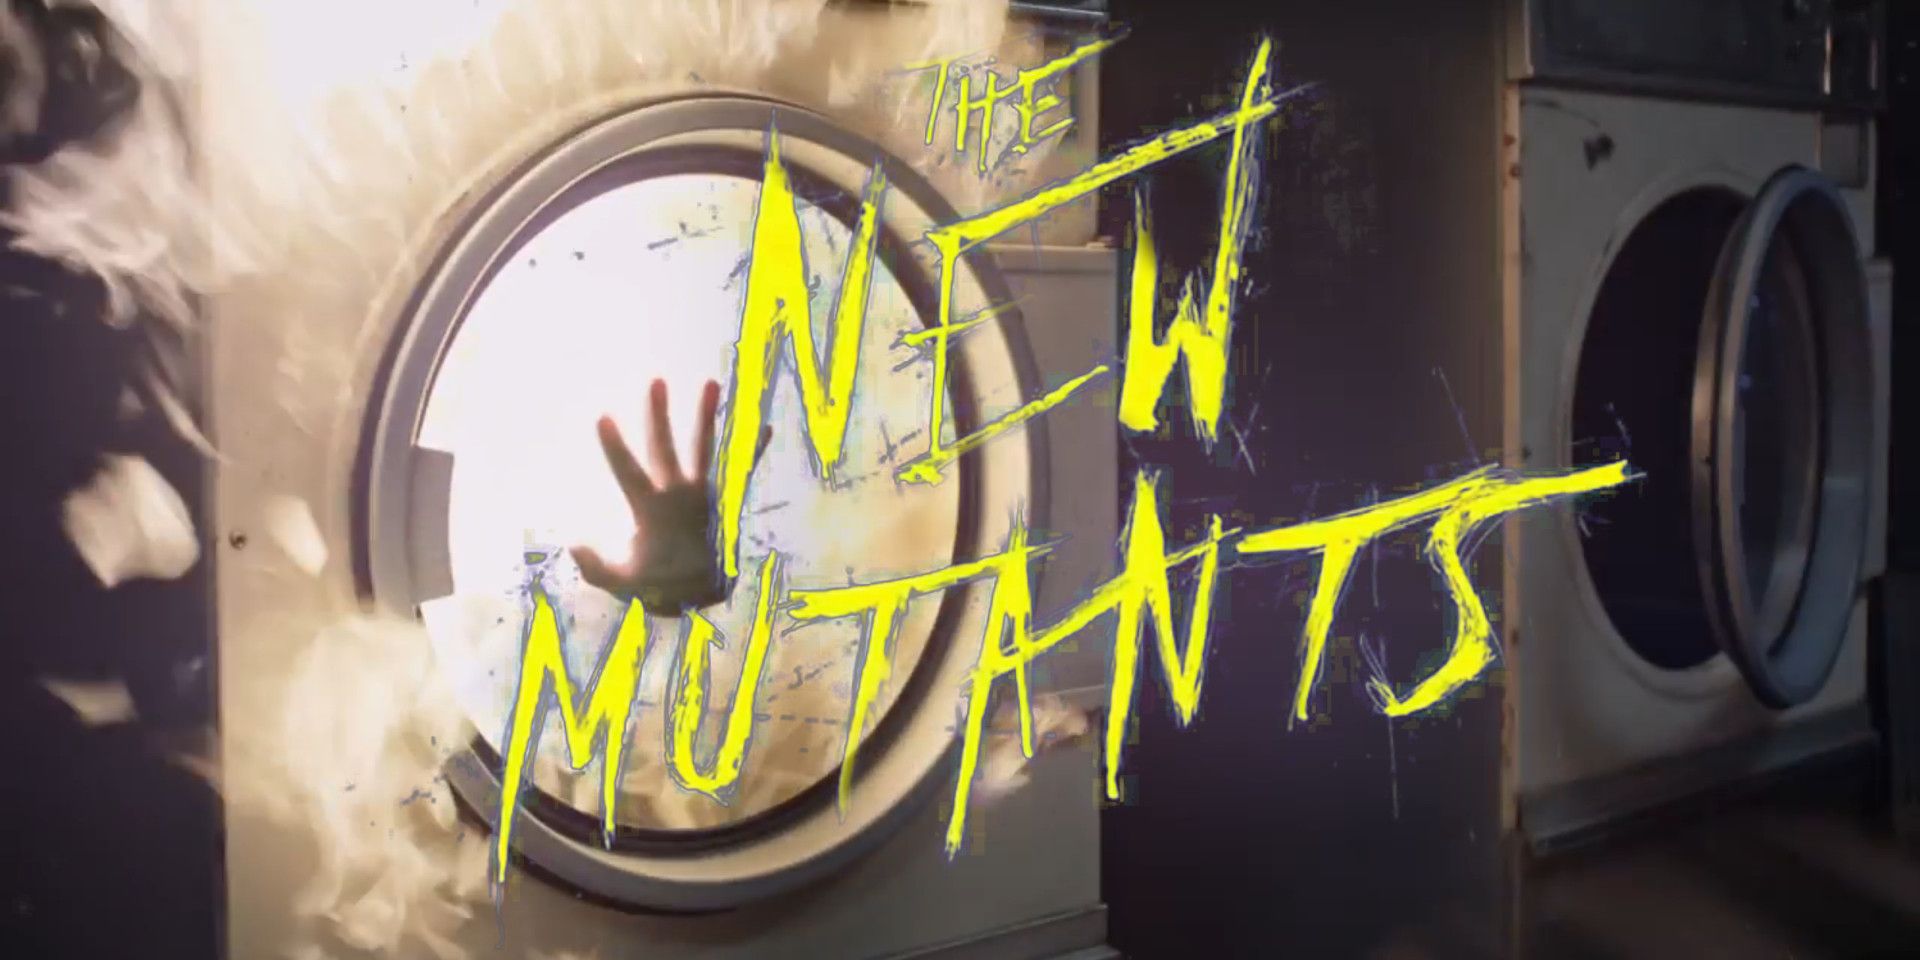 Why Was The New Mutants Delayed For So Long?